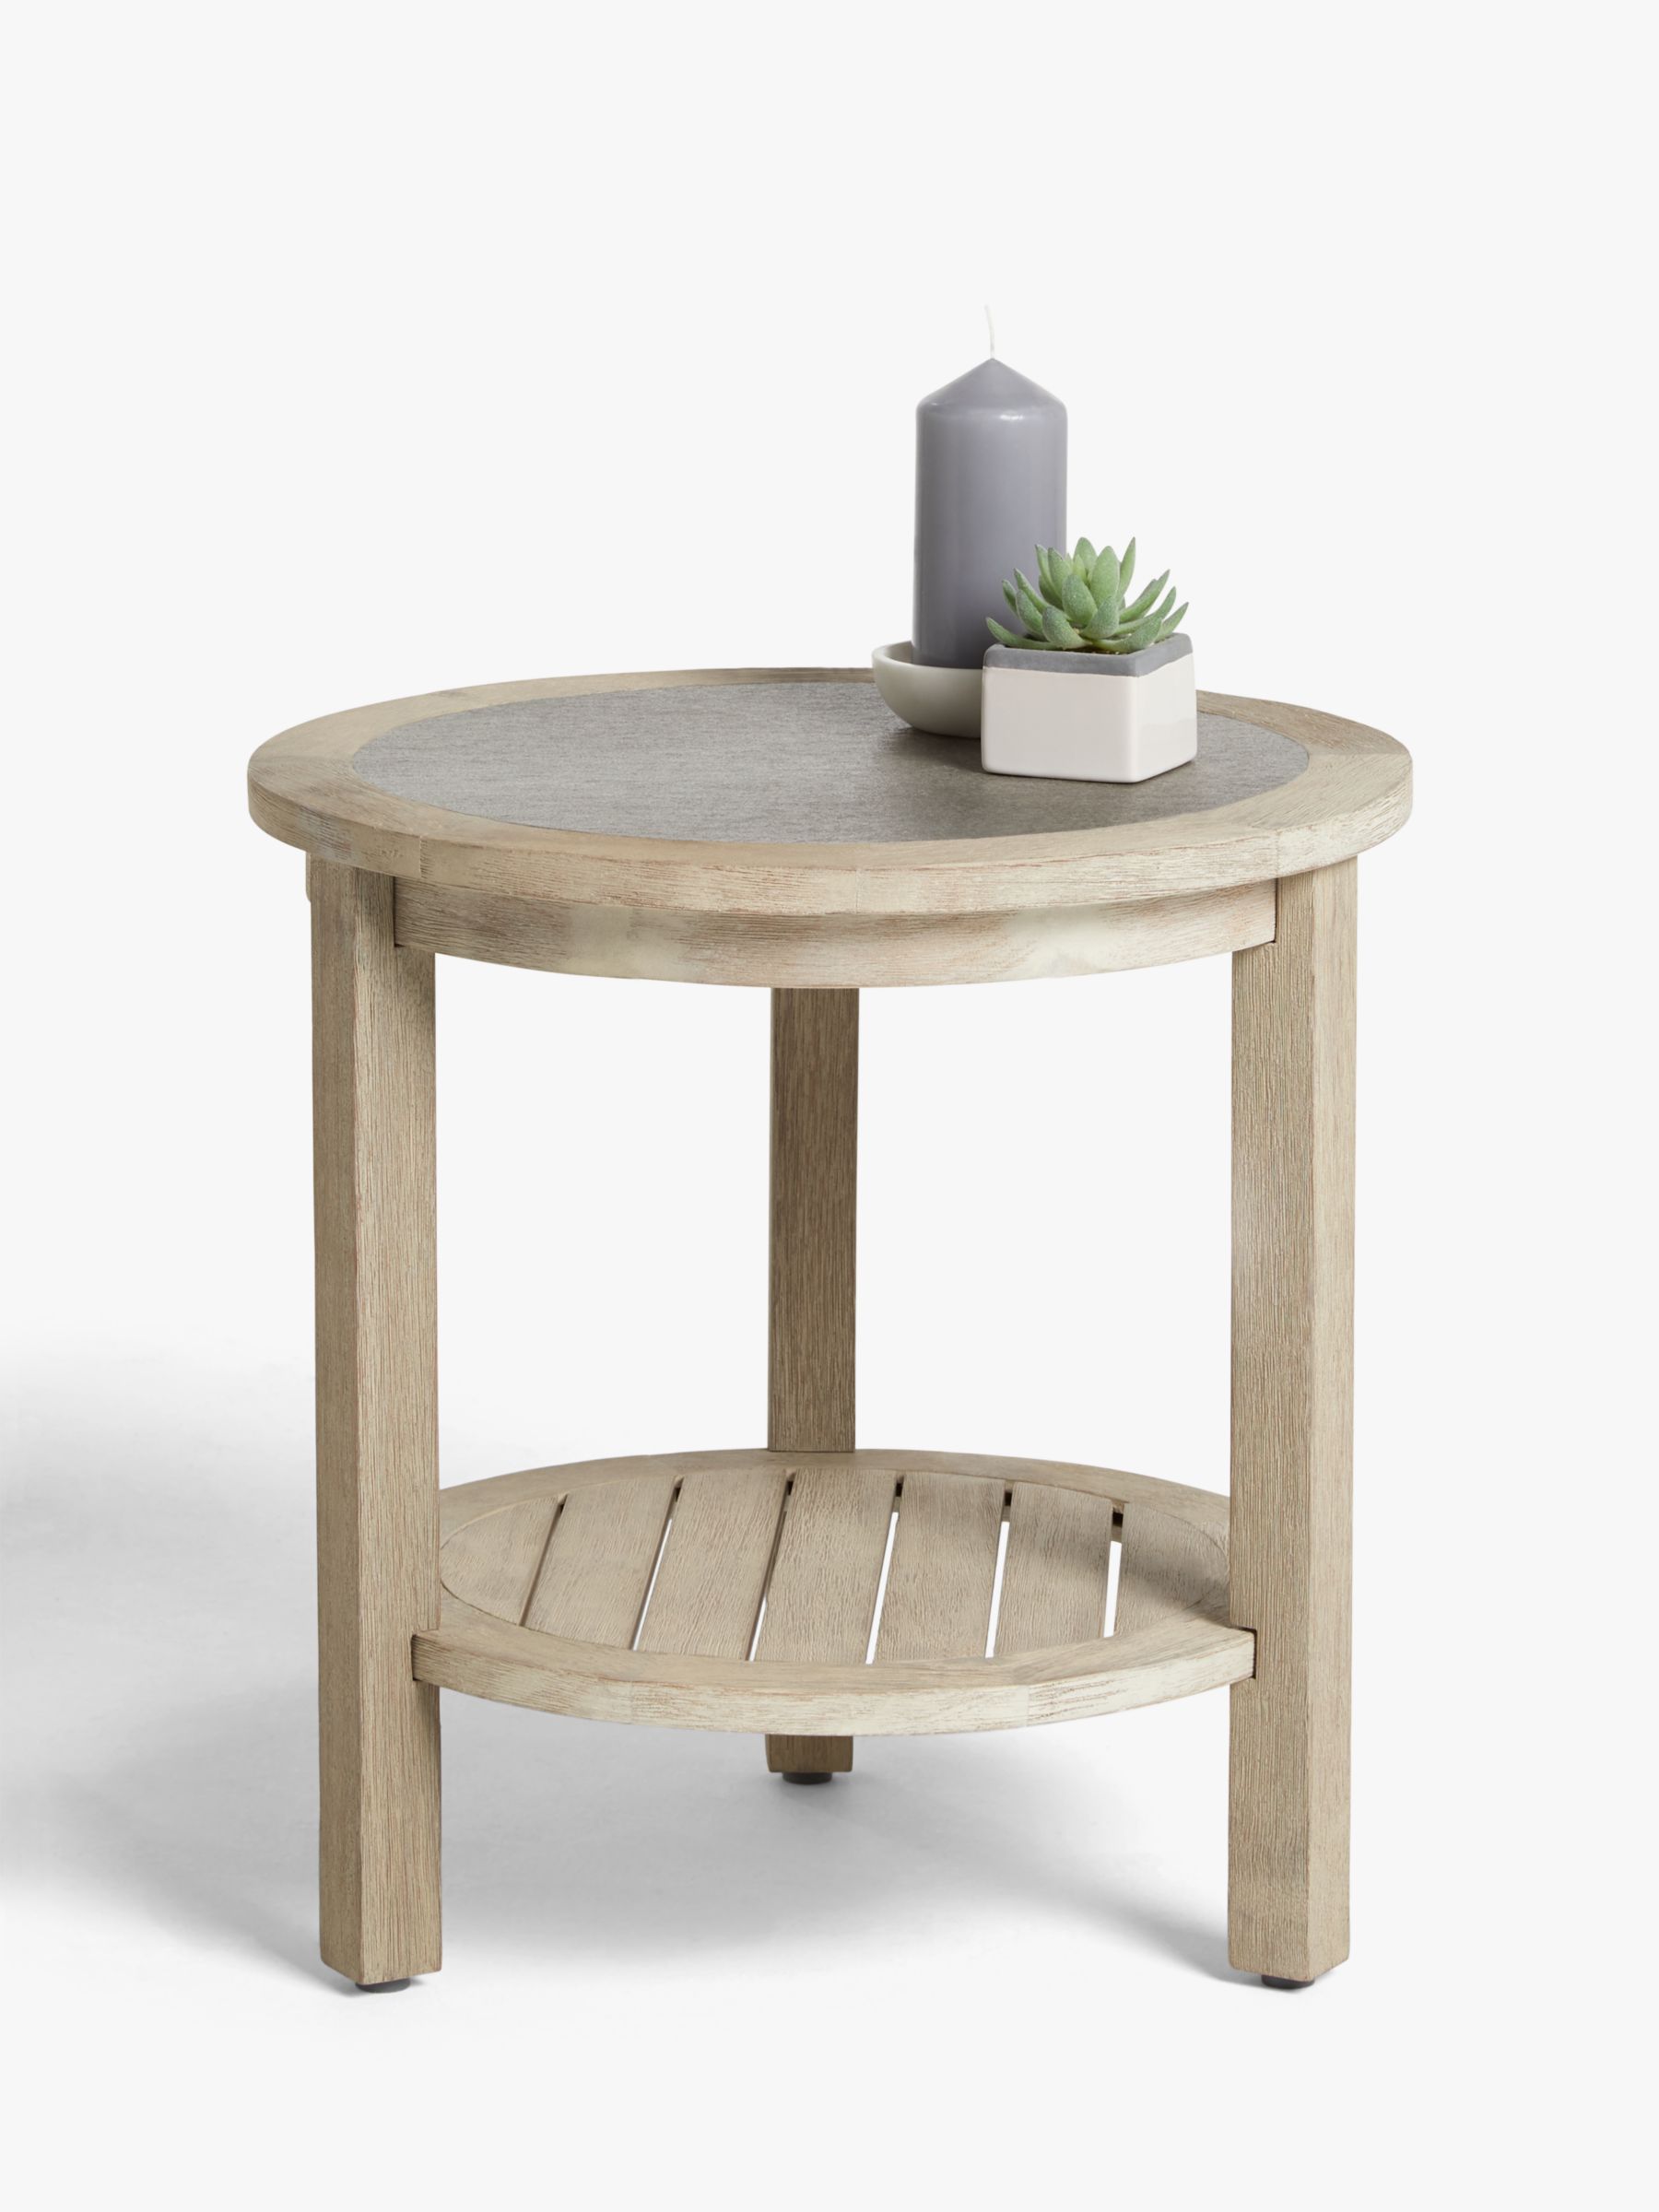 John Lewis & Partners St Ives Round Garden Side Table, FSC-Certified (Eucalyptus Wood), Natural 